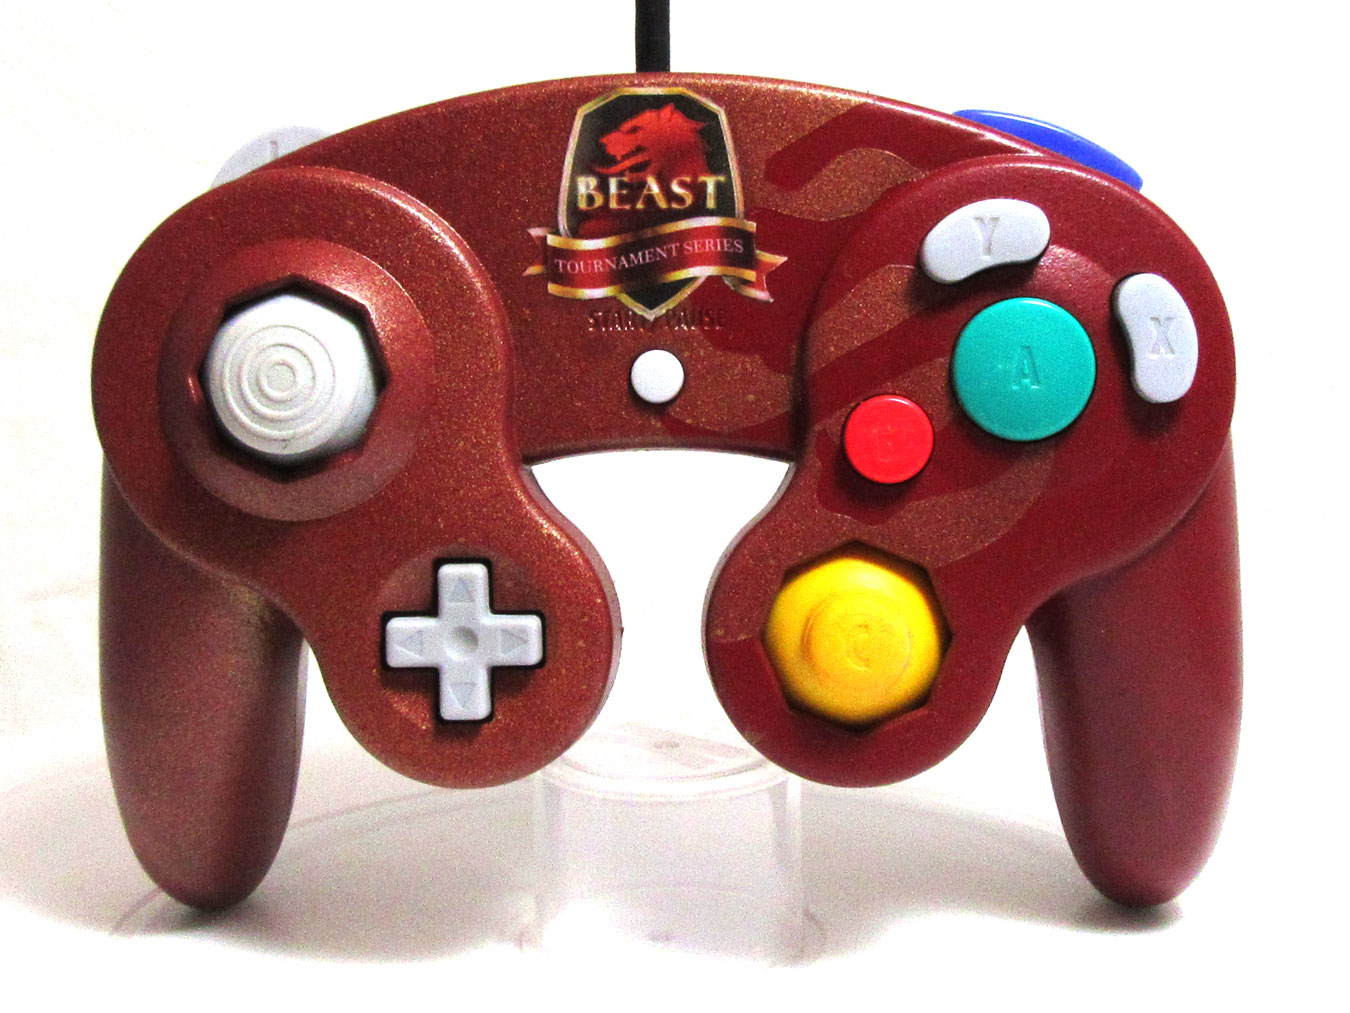 Beast tournament series red/gold